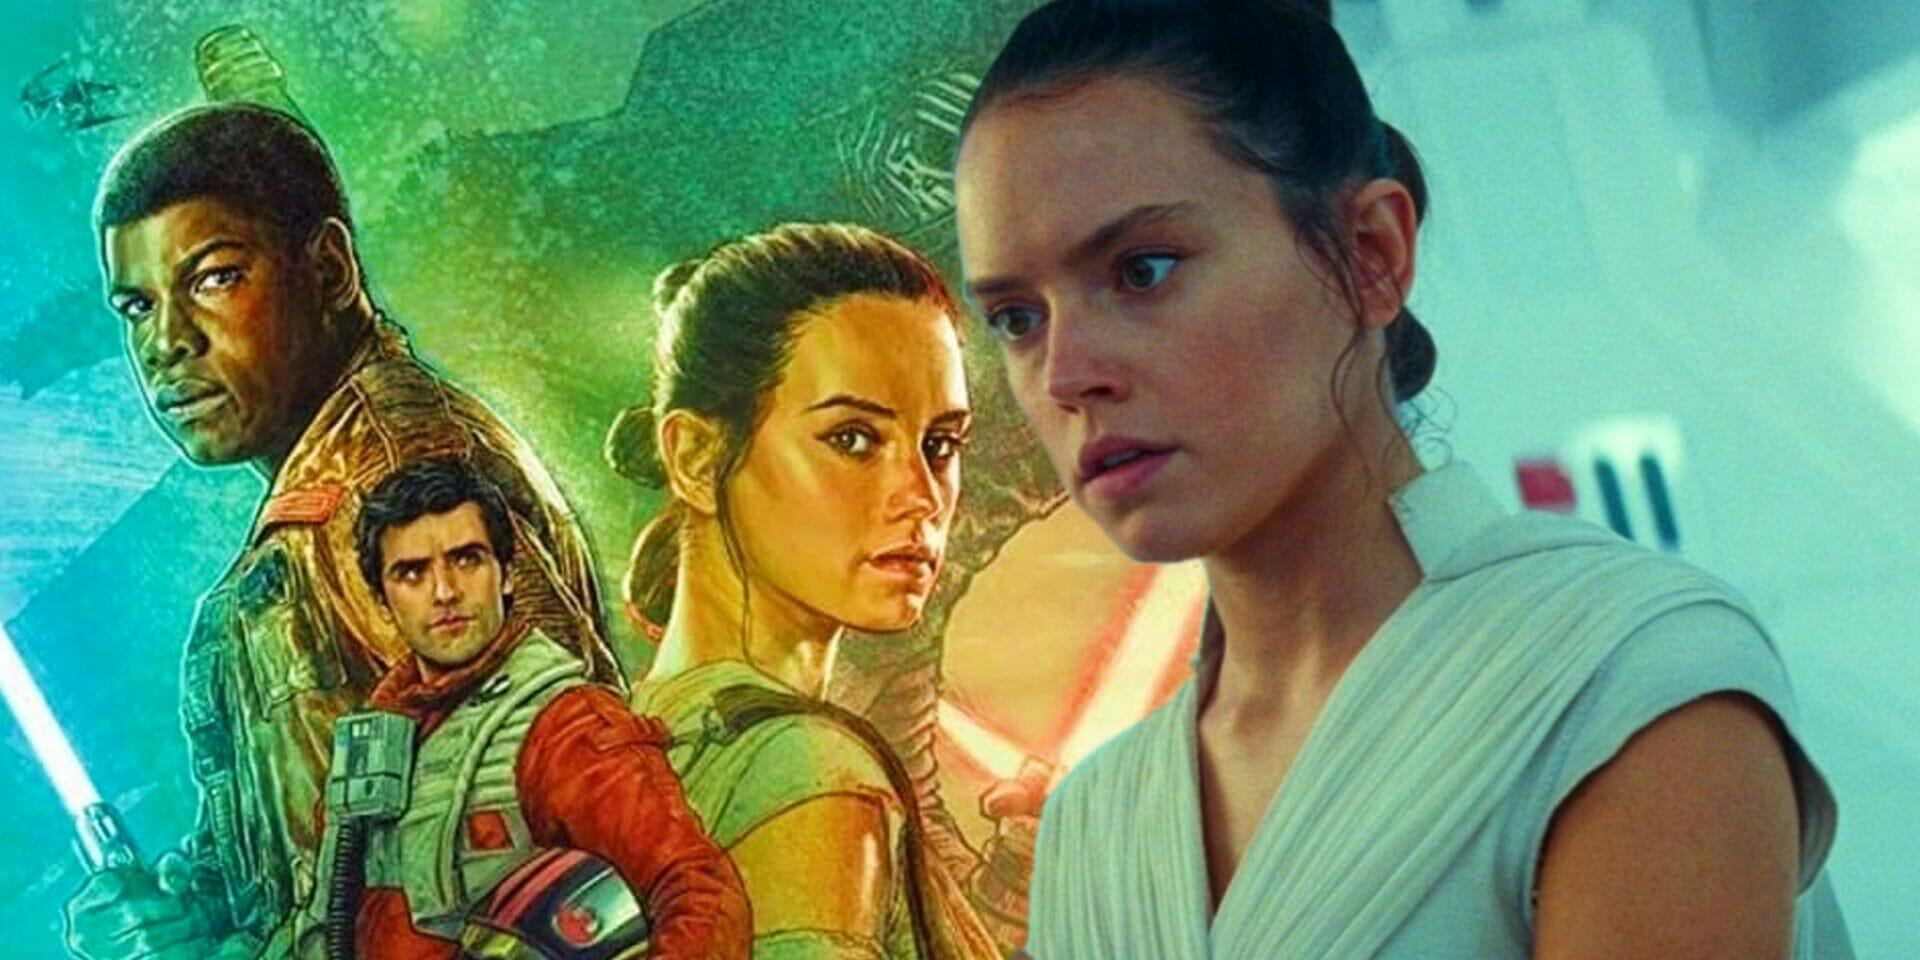 Rey from Episode IX next to artwork for Star Wars The Force Awakens